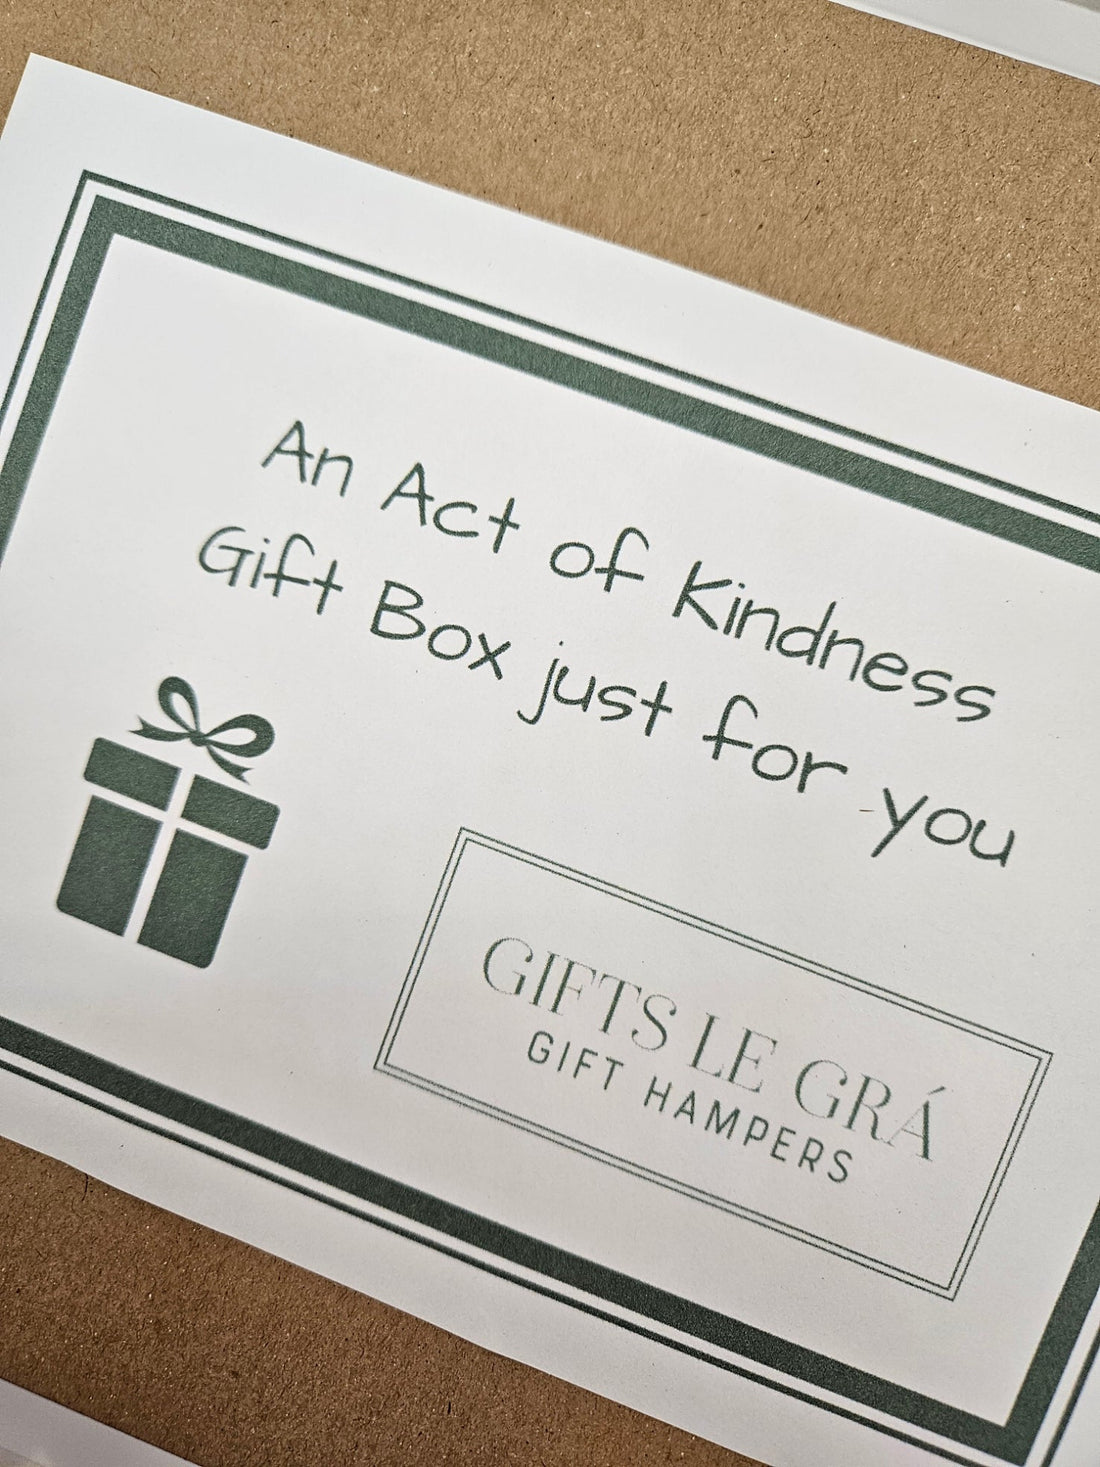 Our Act of Kindness Gift Boxes are back again - Gifts le Grá